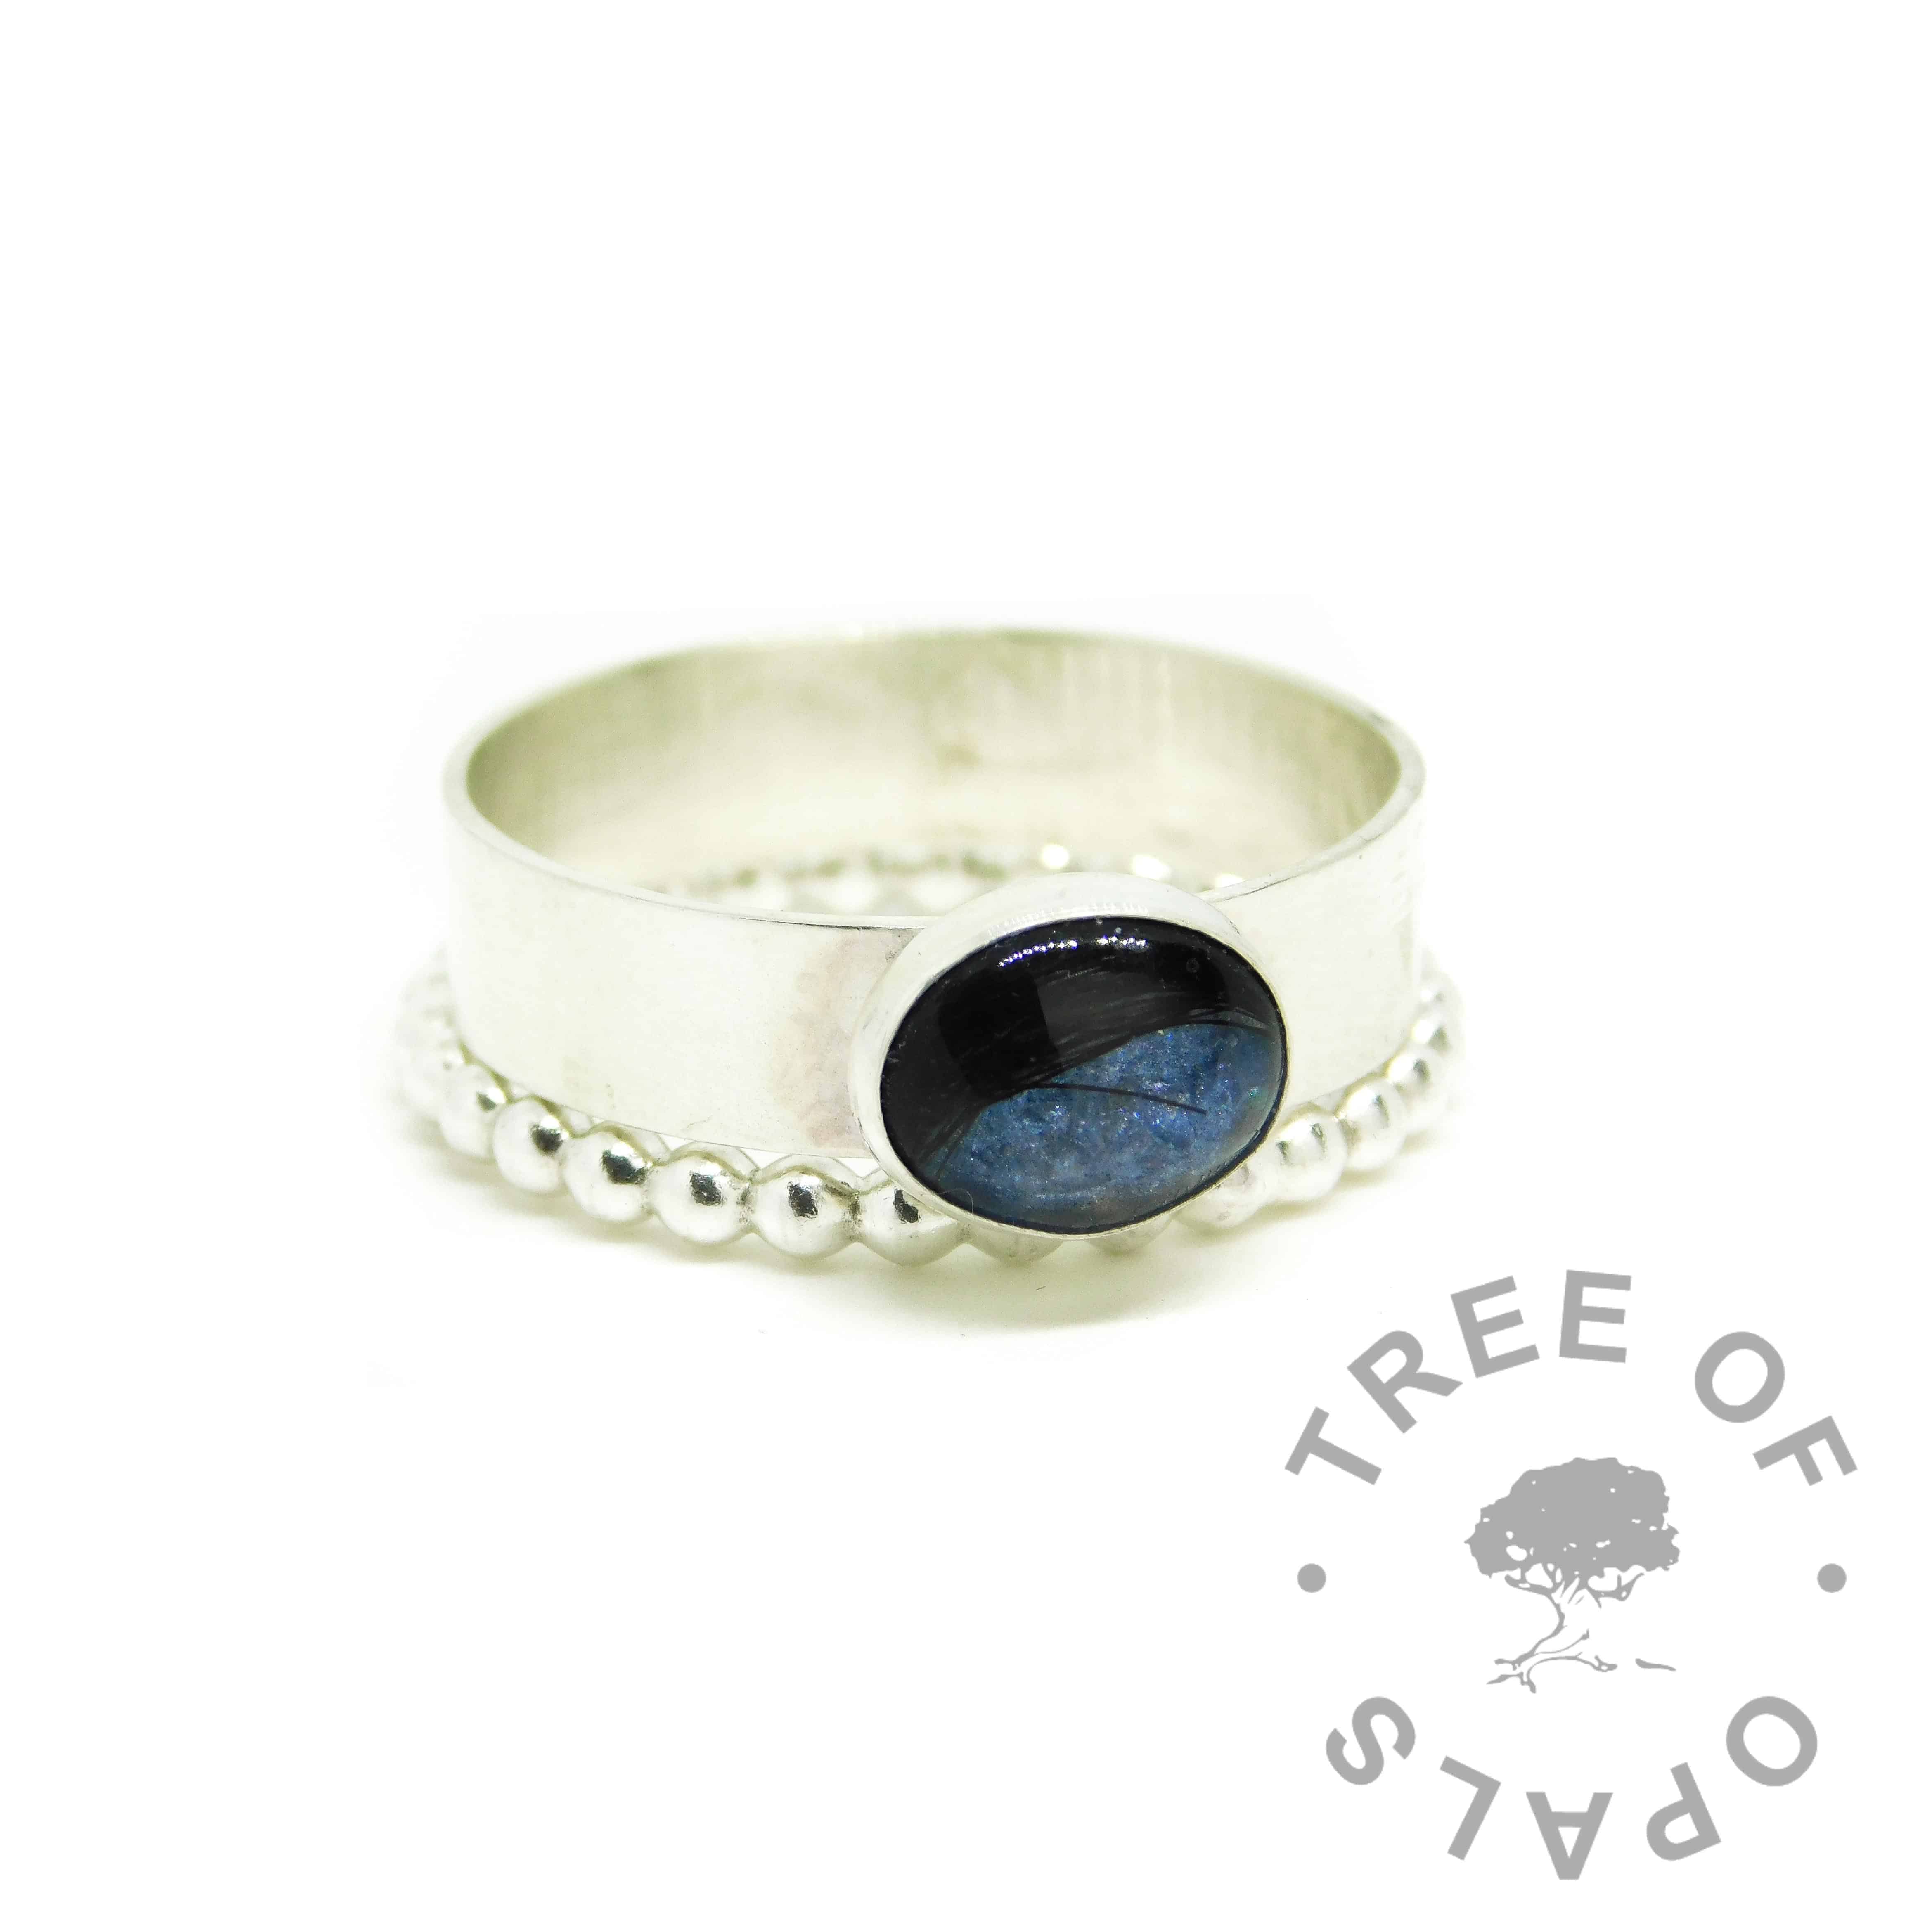 blue hair ring, lock of hair ring on 6mm shiny band. Aegean blue resin sparkle mix, shown with bubble wire stacker